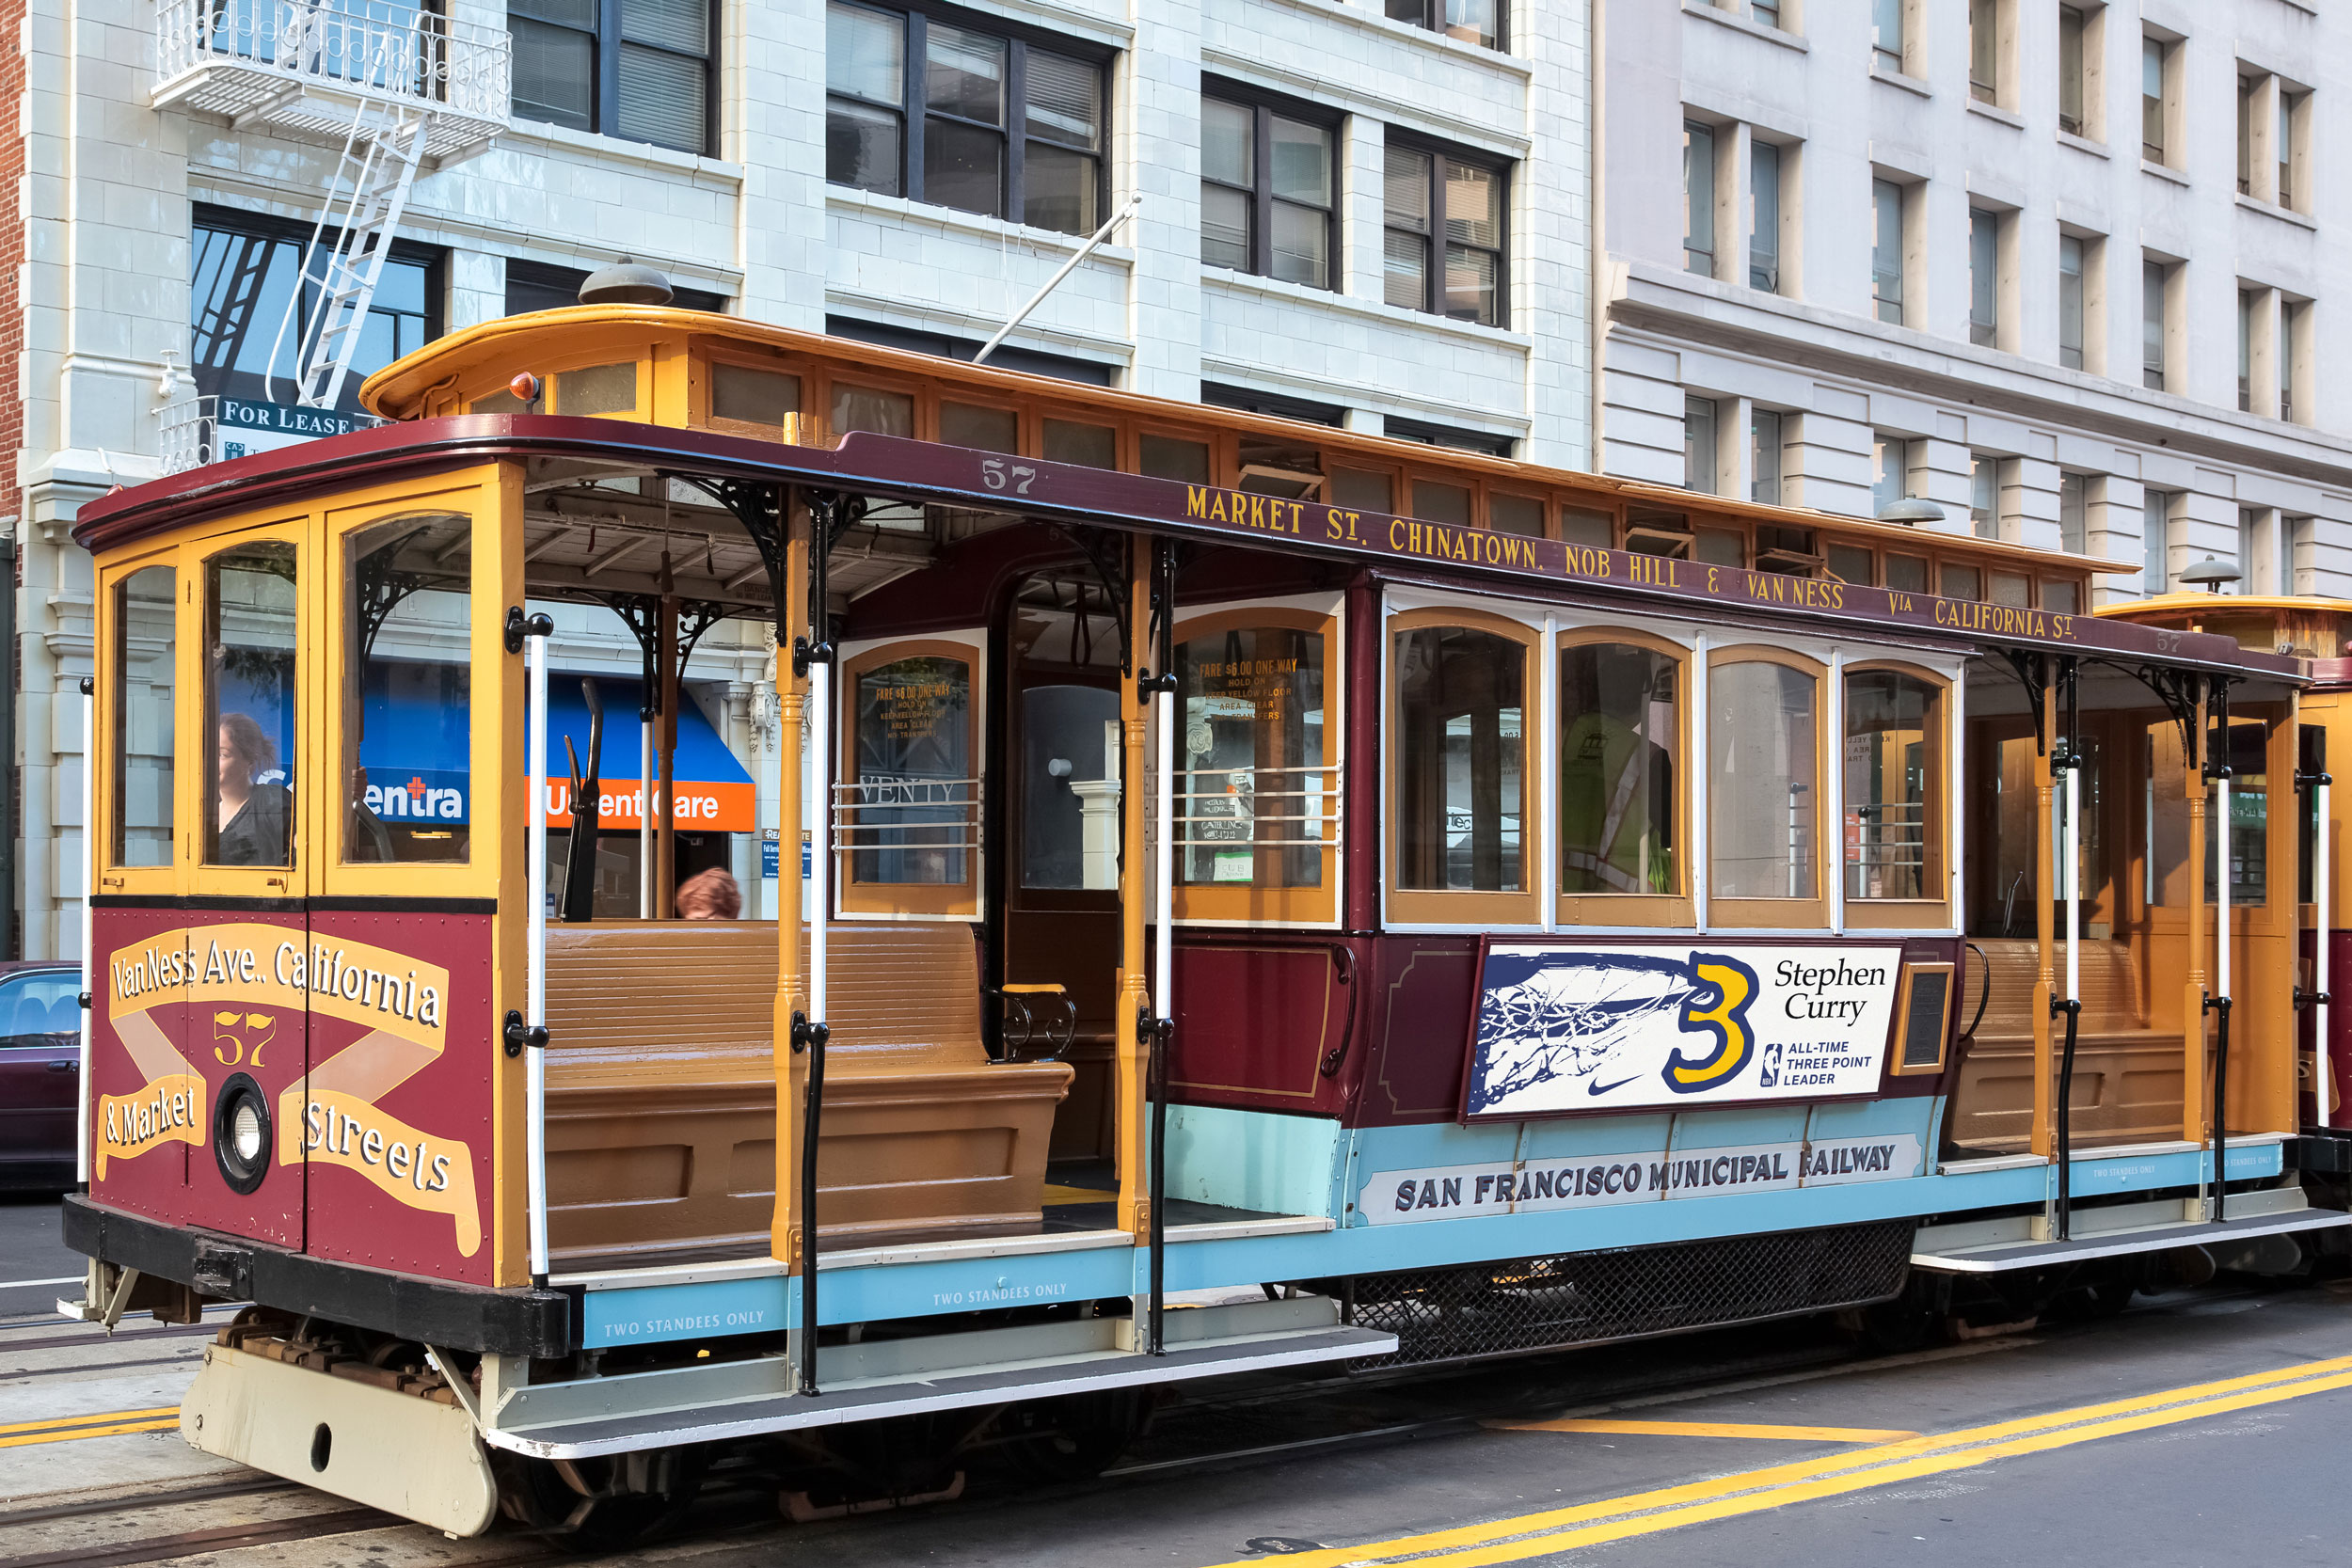 5. Stephen Curry Cable Car